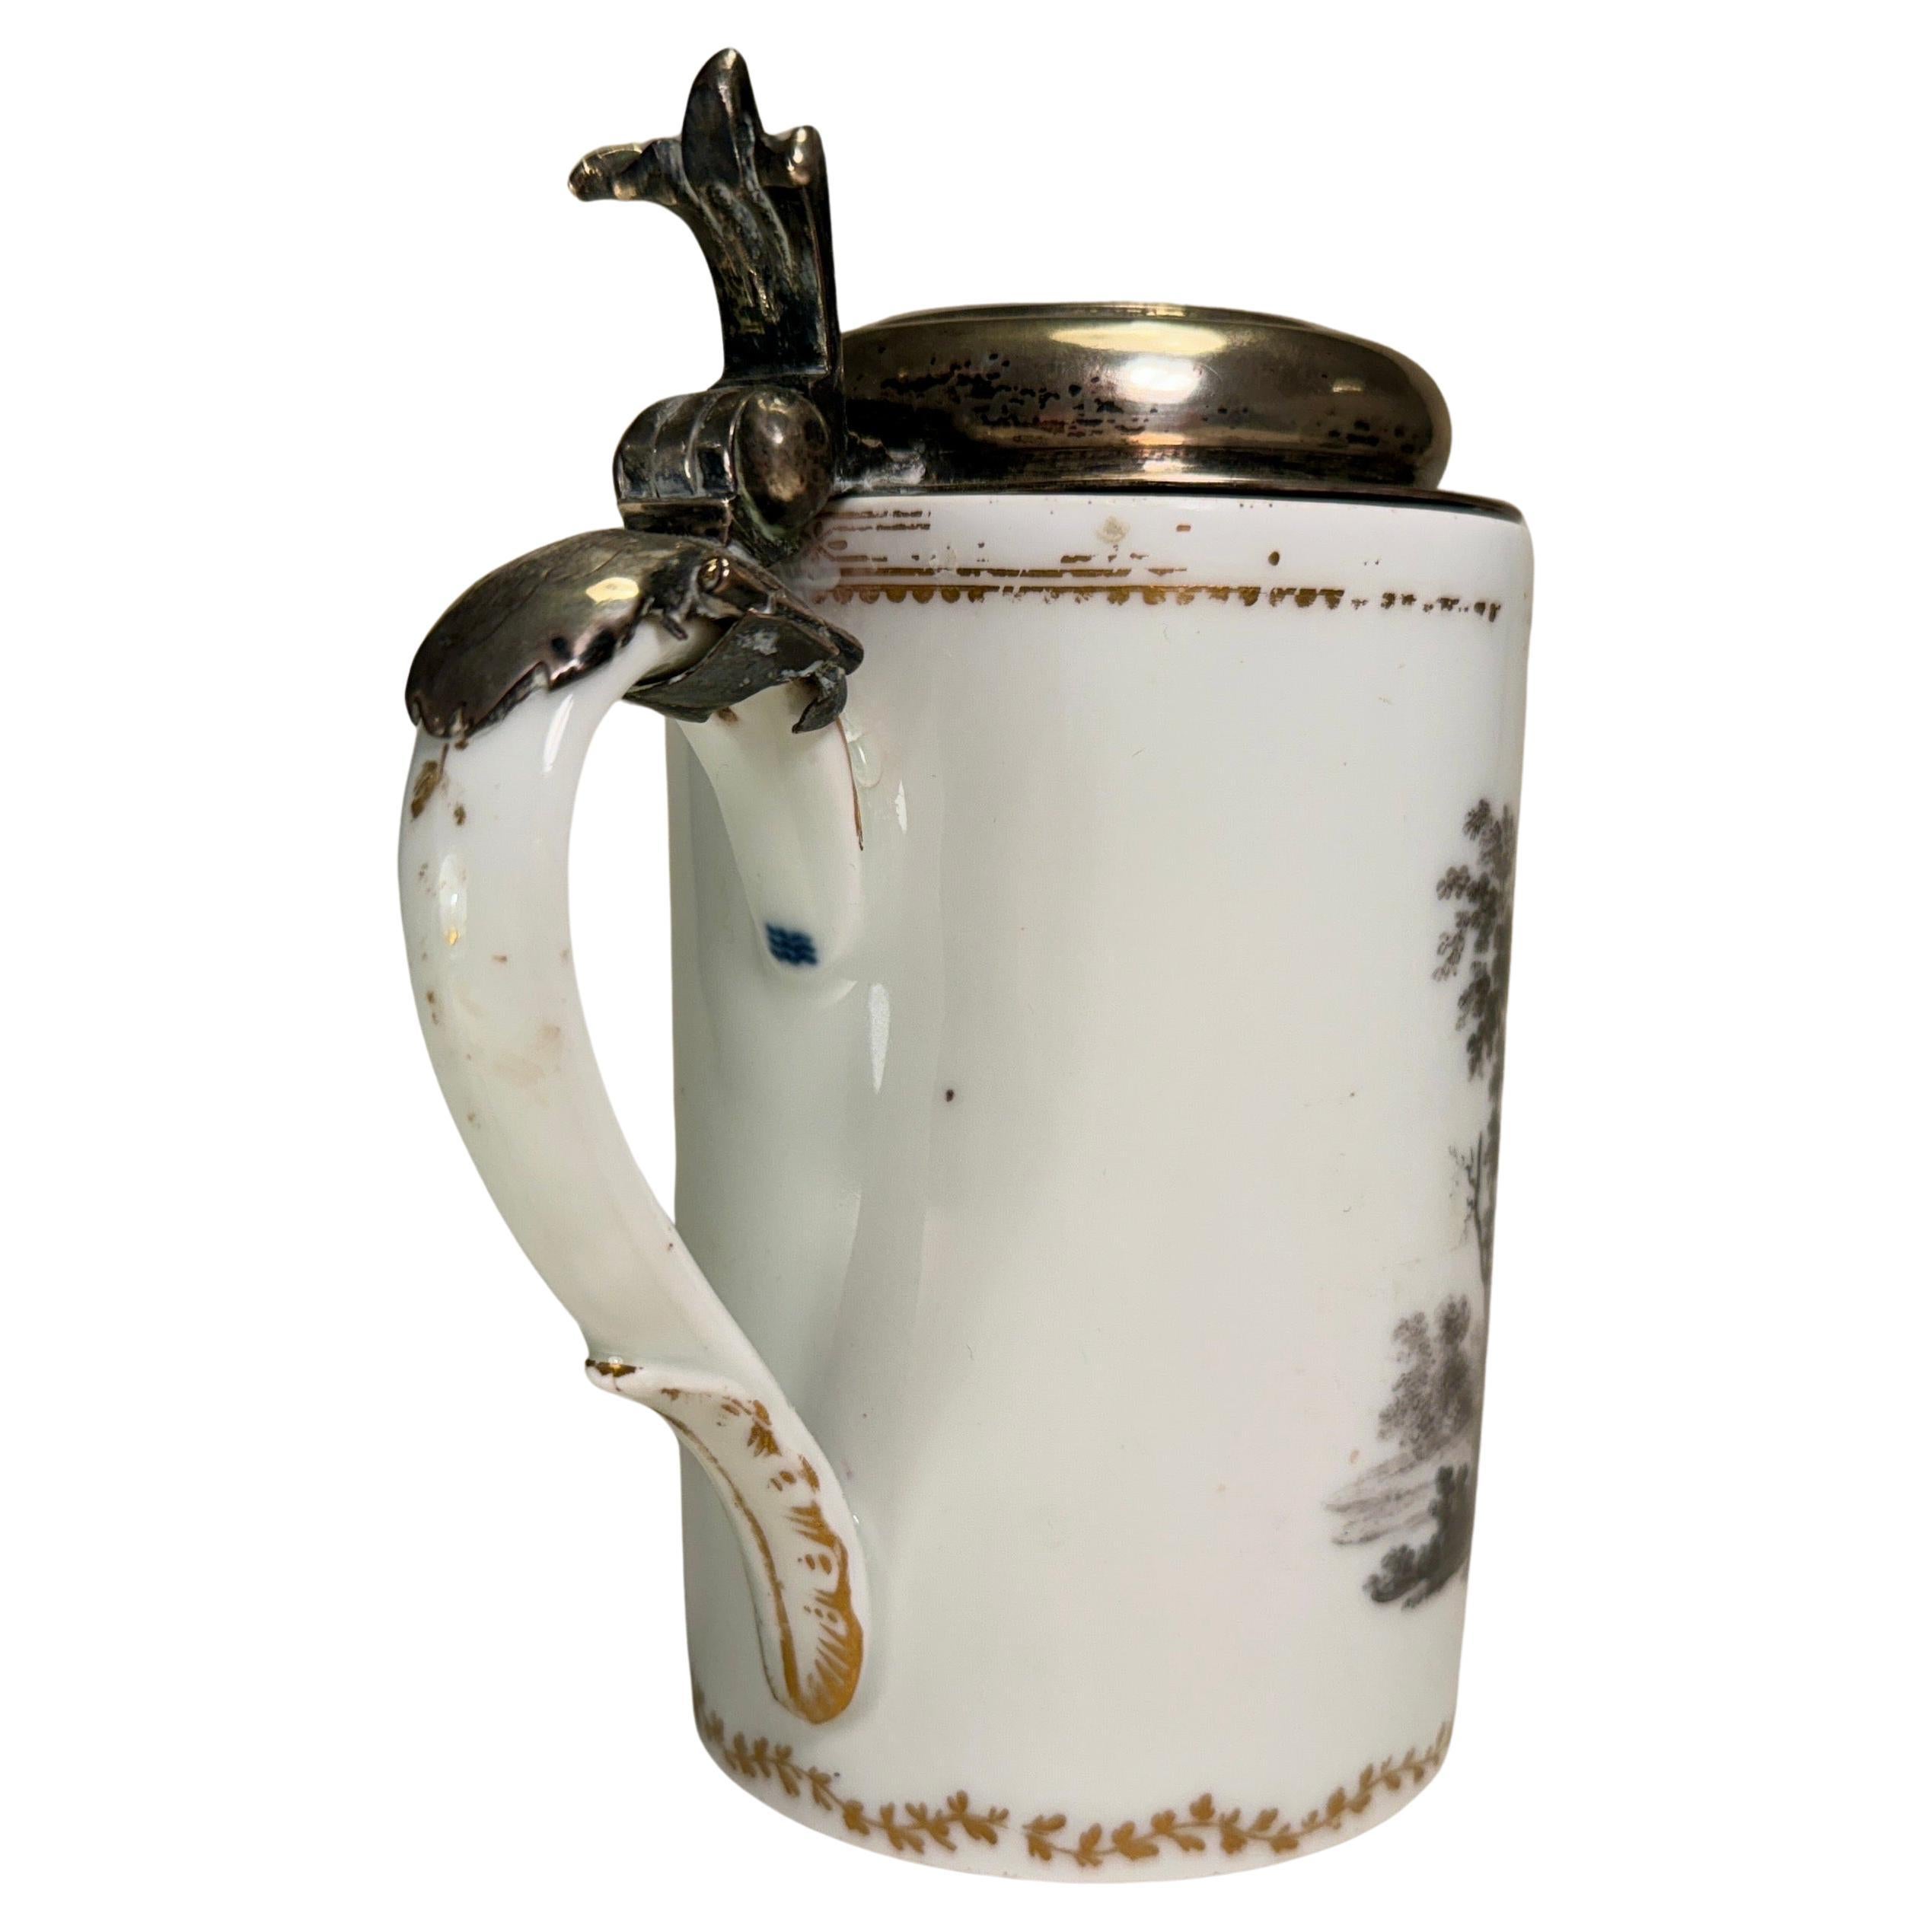 Danish Royal Copenhagen Porcelain Jug with Ormolu Gilt Silver Lid and Hand-Painted Neoclassical Motives in Sepia.
The porcelain jug is signed with the classic 3 blue waves, representing the 3 main water sounds and belts between the Baltics and the